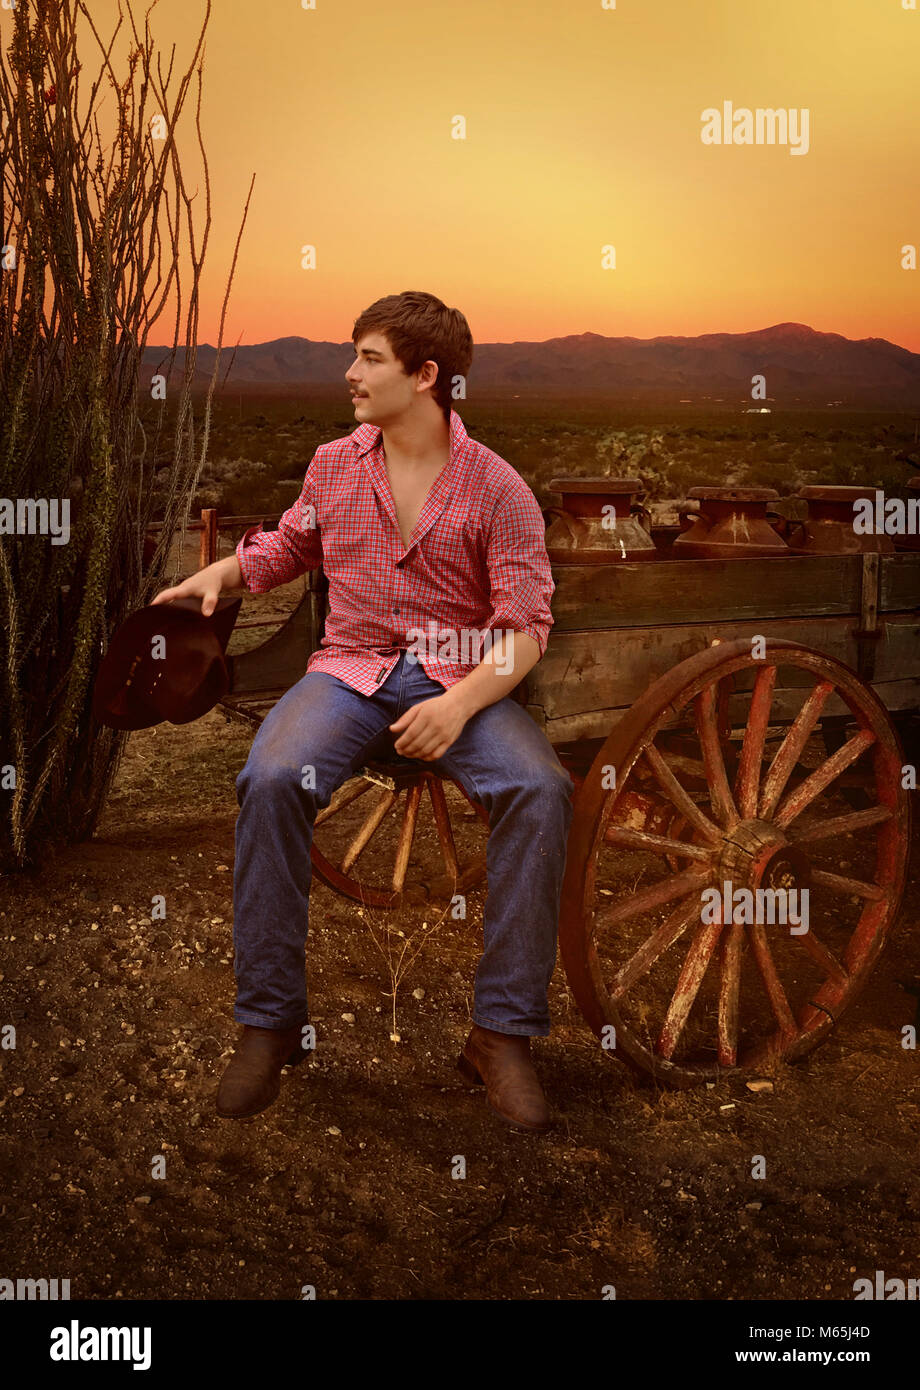 Vintage image of handsome cowboy in jeans and checked shirt antique wagon on a ranch at sunset Stock Photo